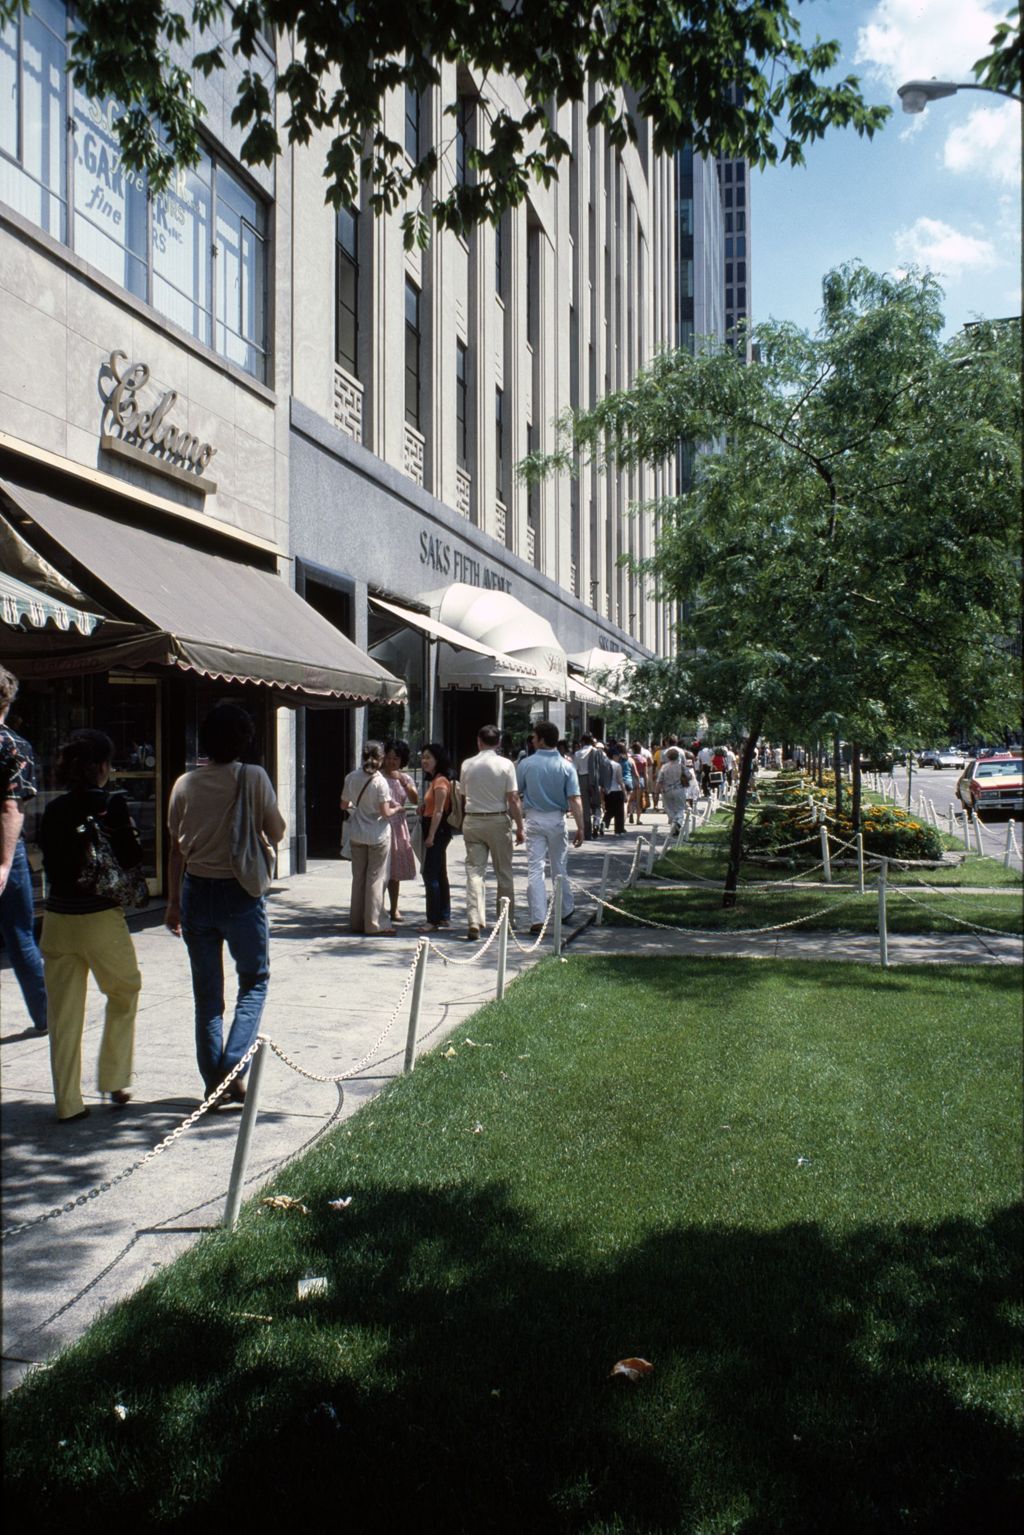 Miniature of Pedestrians in front of North Michigan Avenue stores